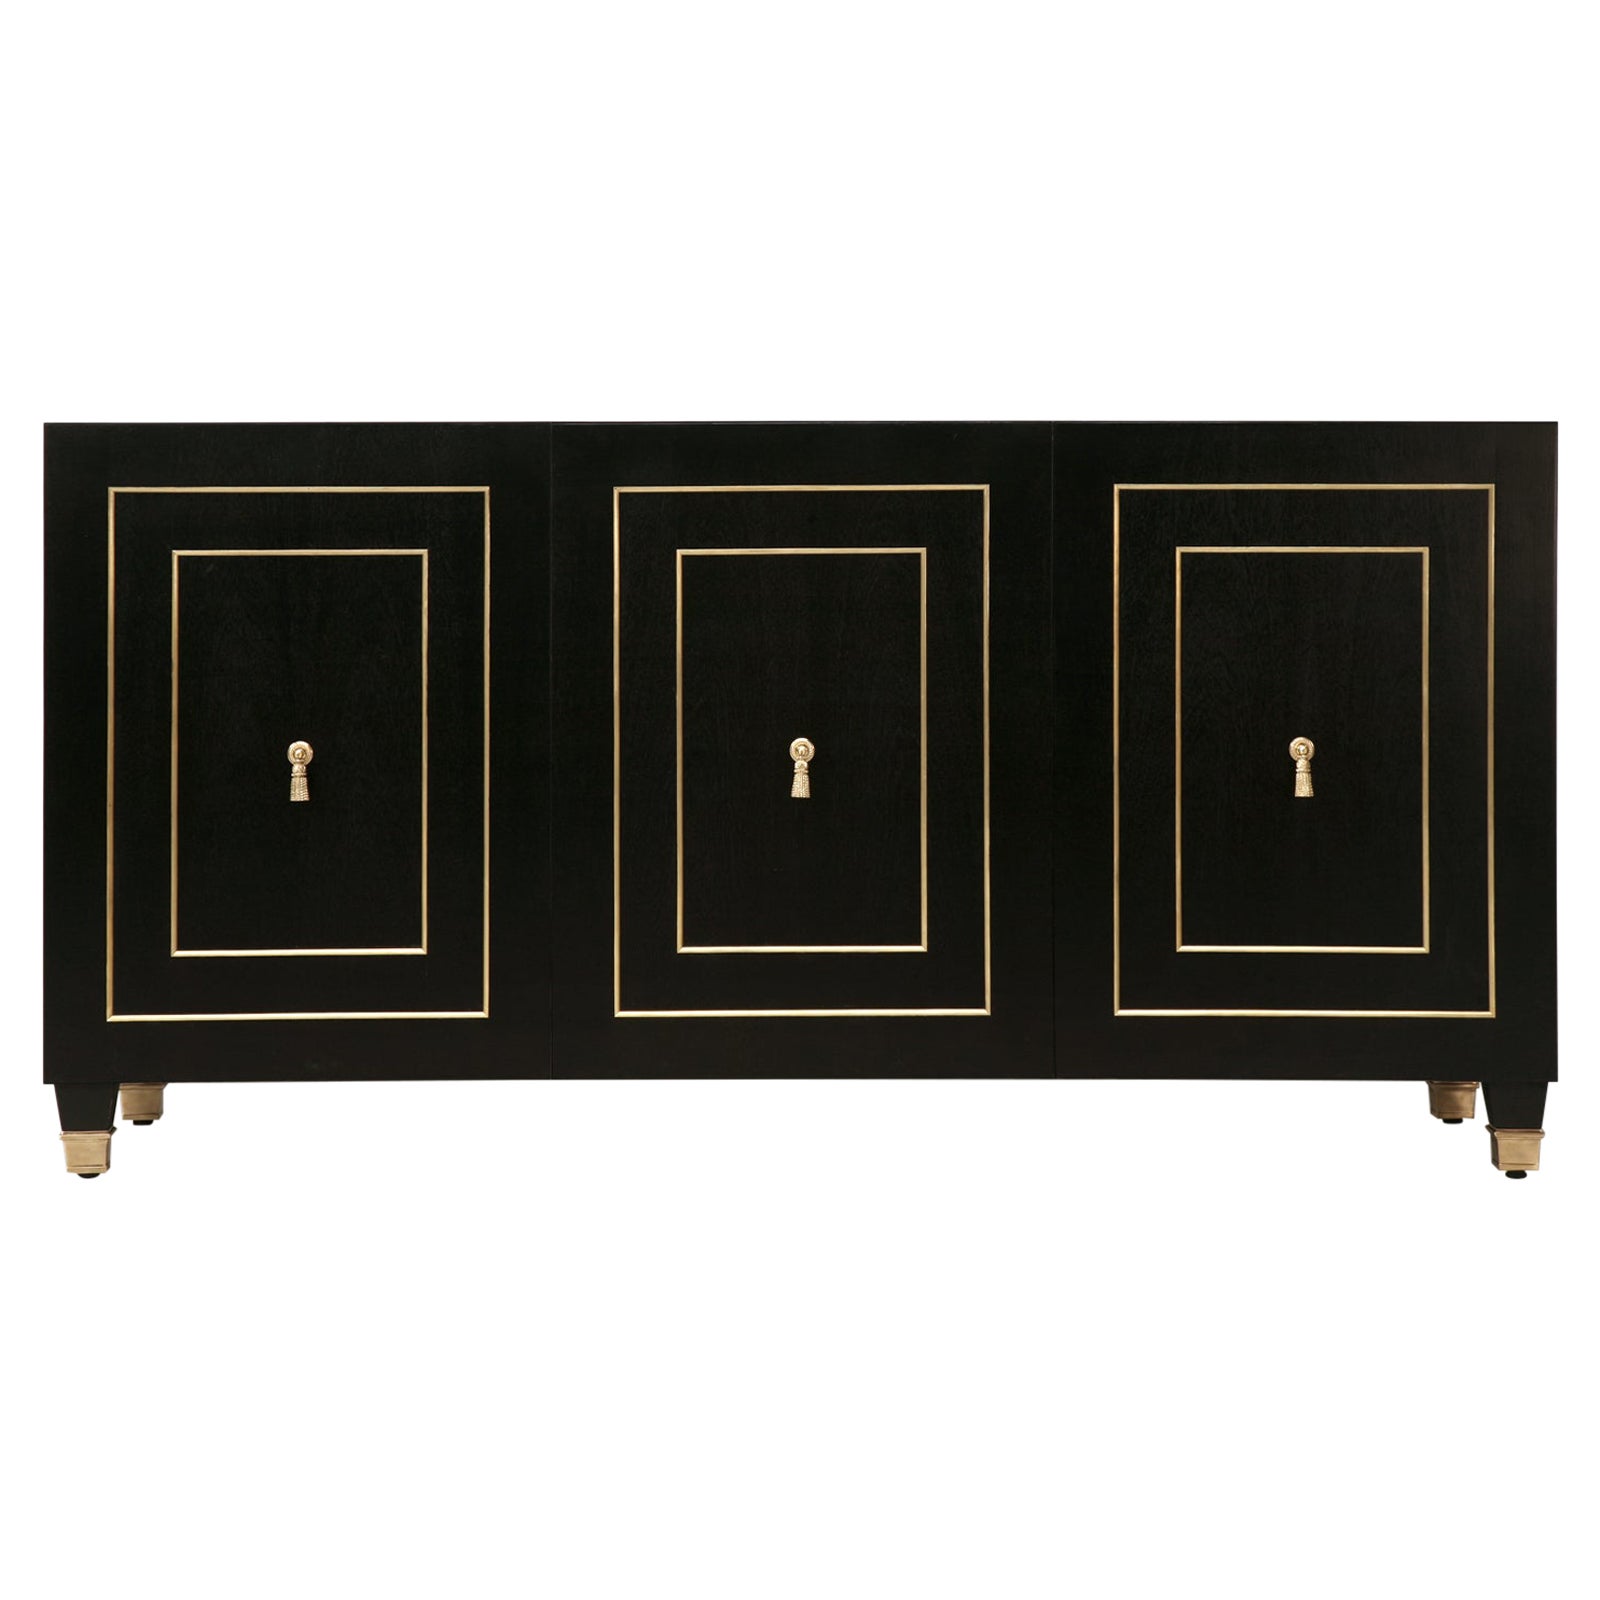 French Inspired Louis XVI Style Ebonized Mahogany Buffet with Solid Bronze Trim